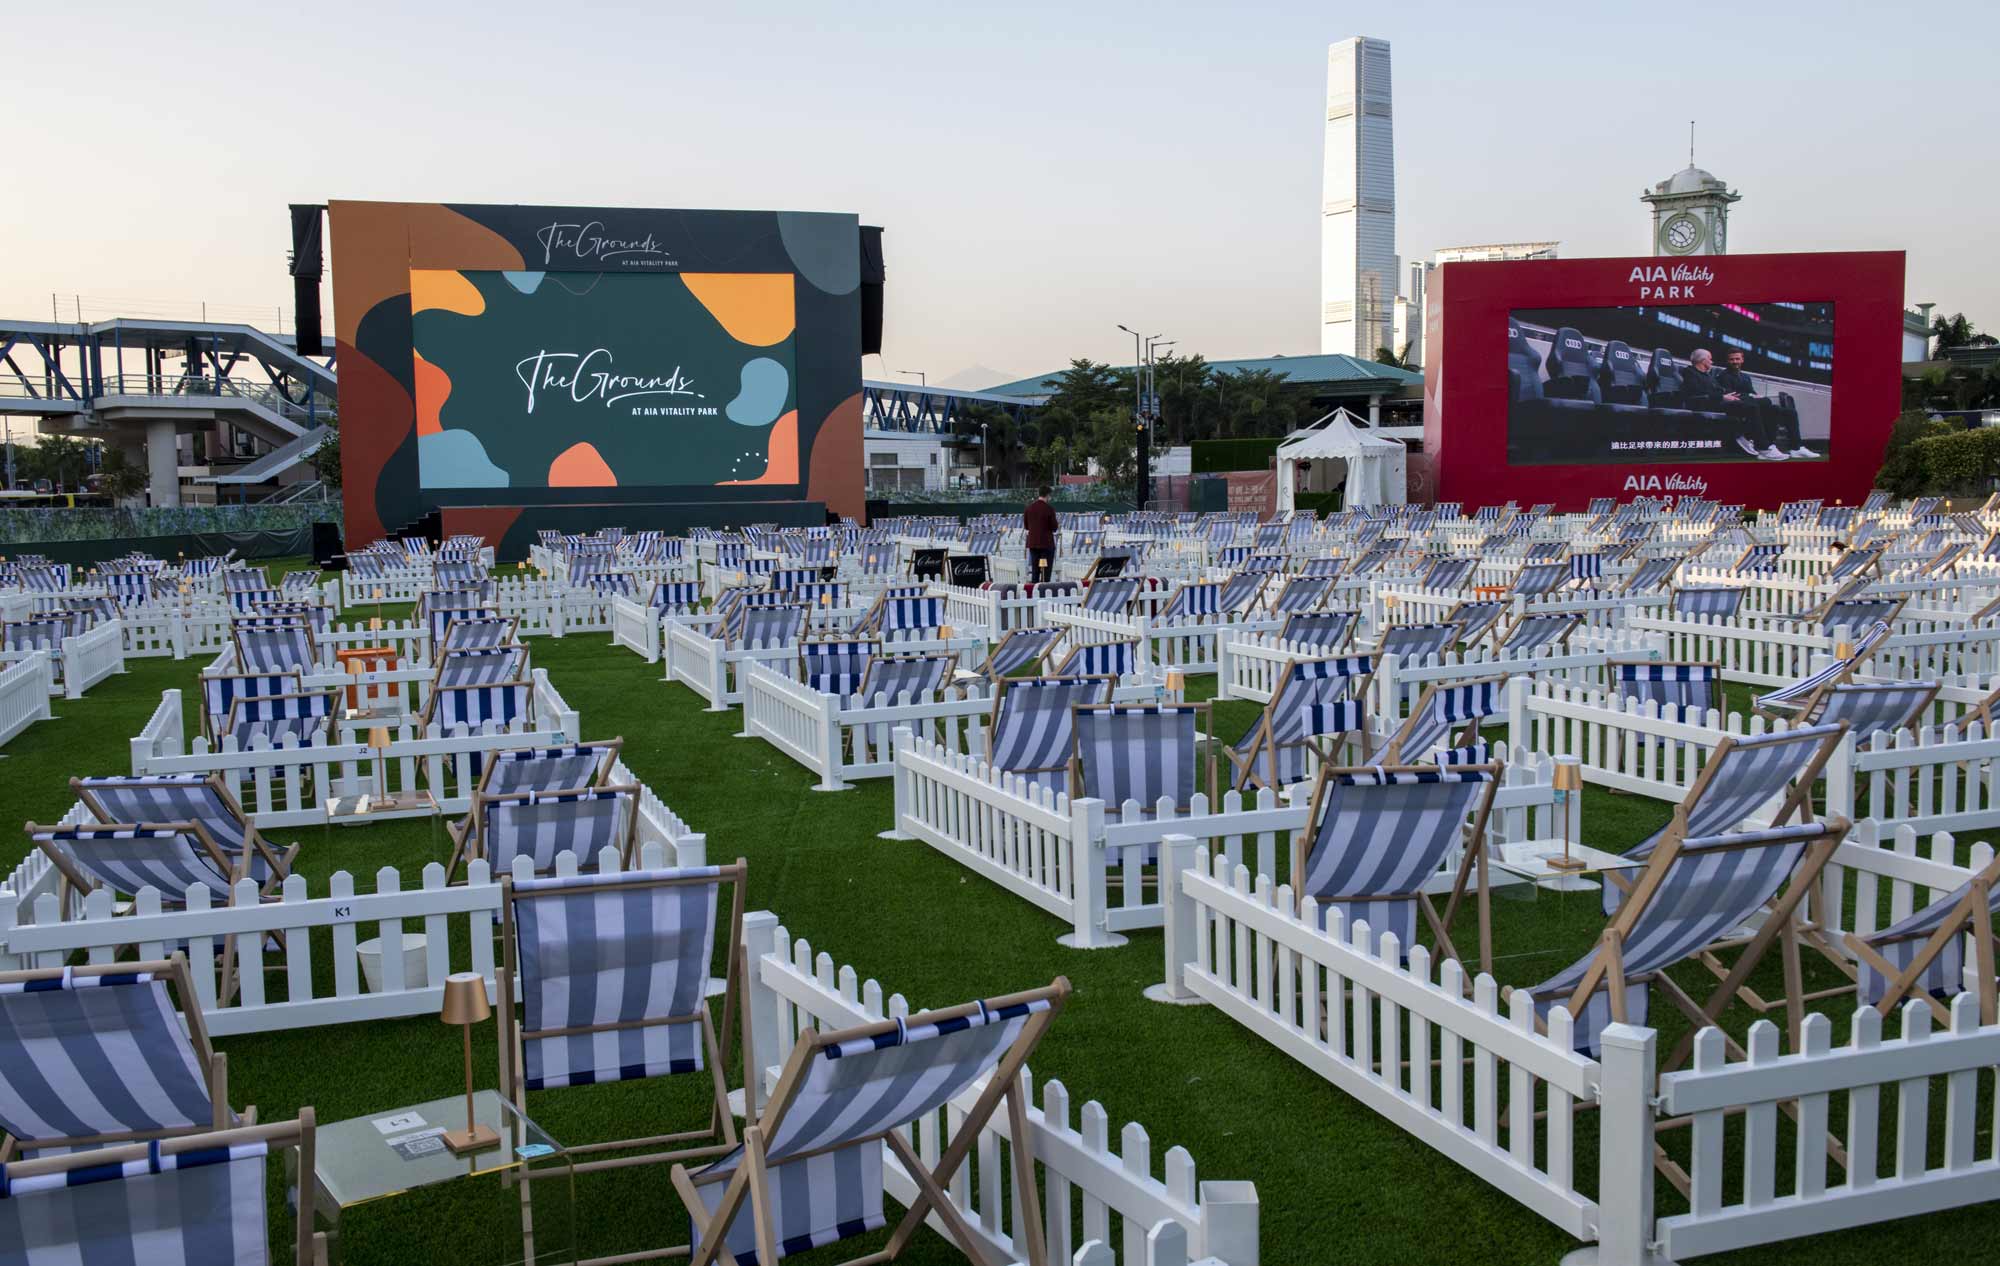 Things to do in Hong Kong in March include outdoor cinema The Grounds at AIA Vitality Park